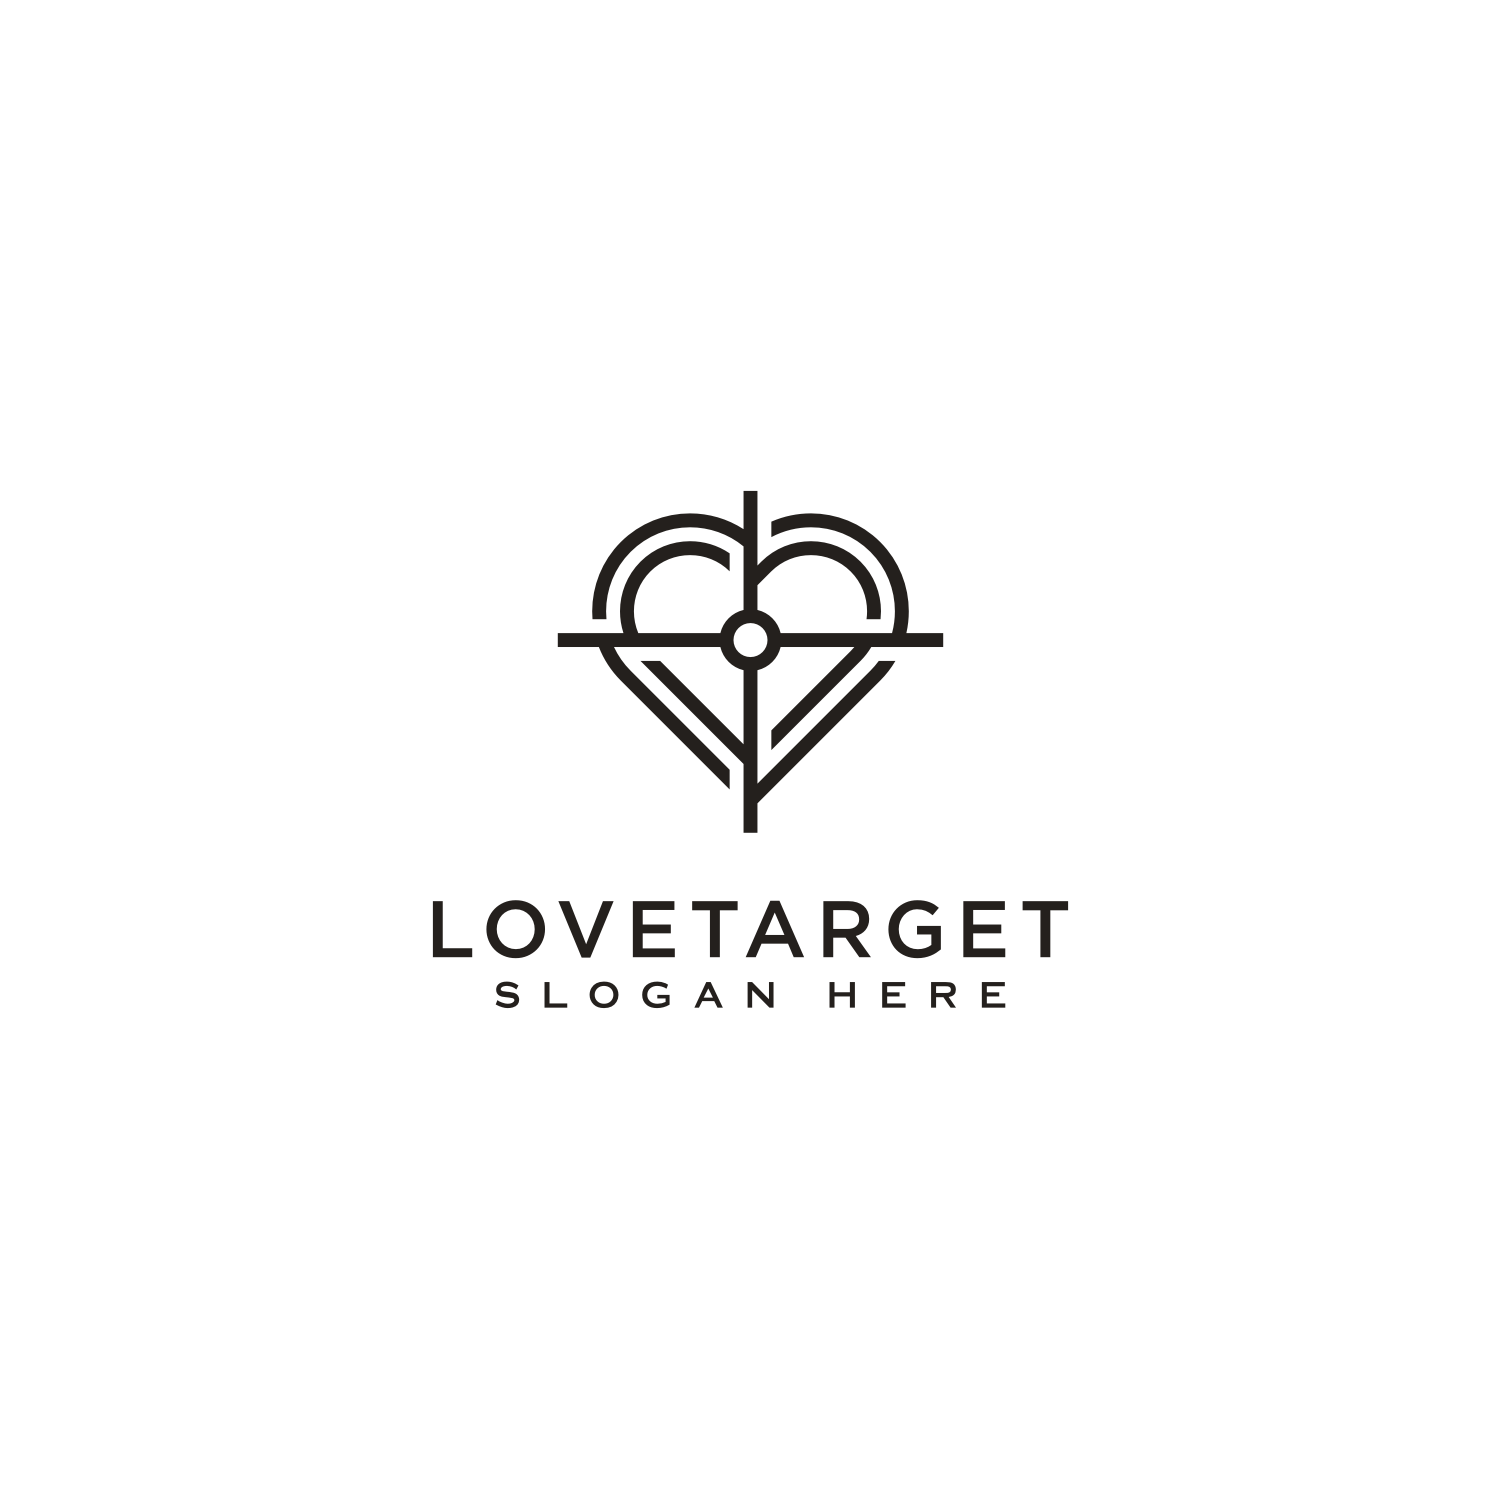 Love Target Logo Design Vector Template cover image.